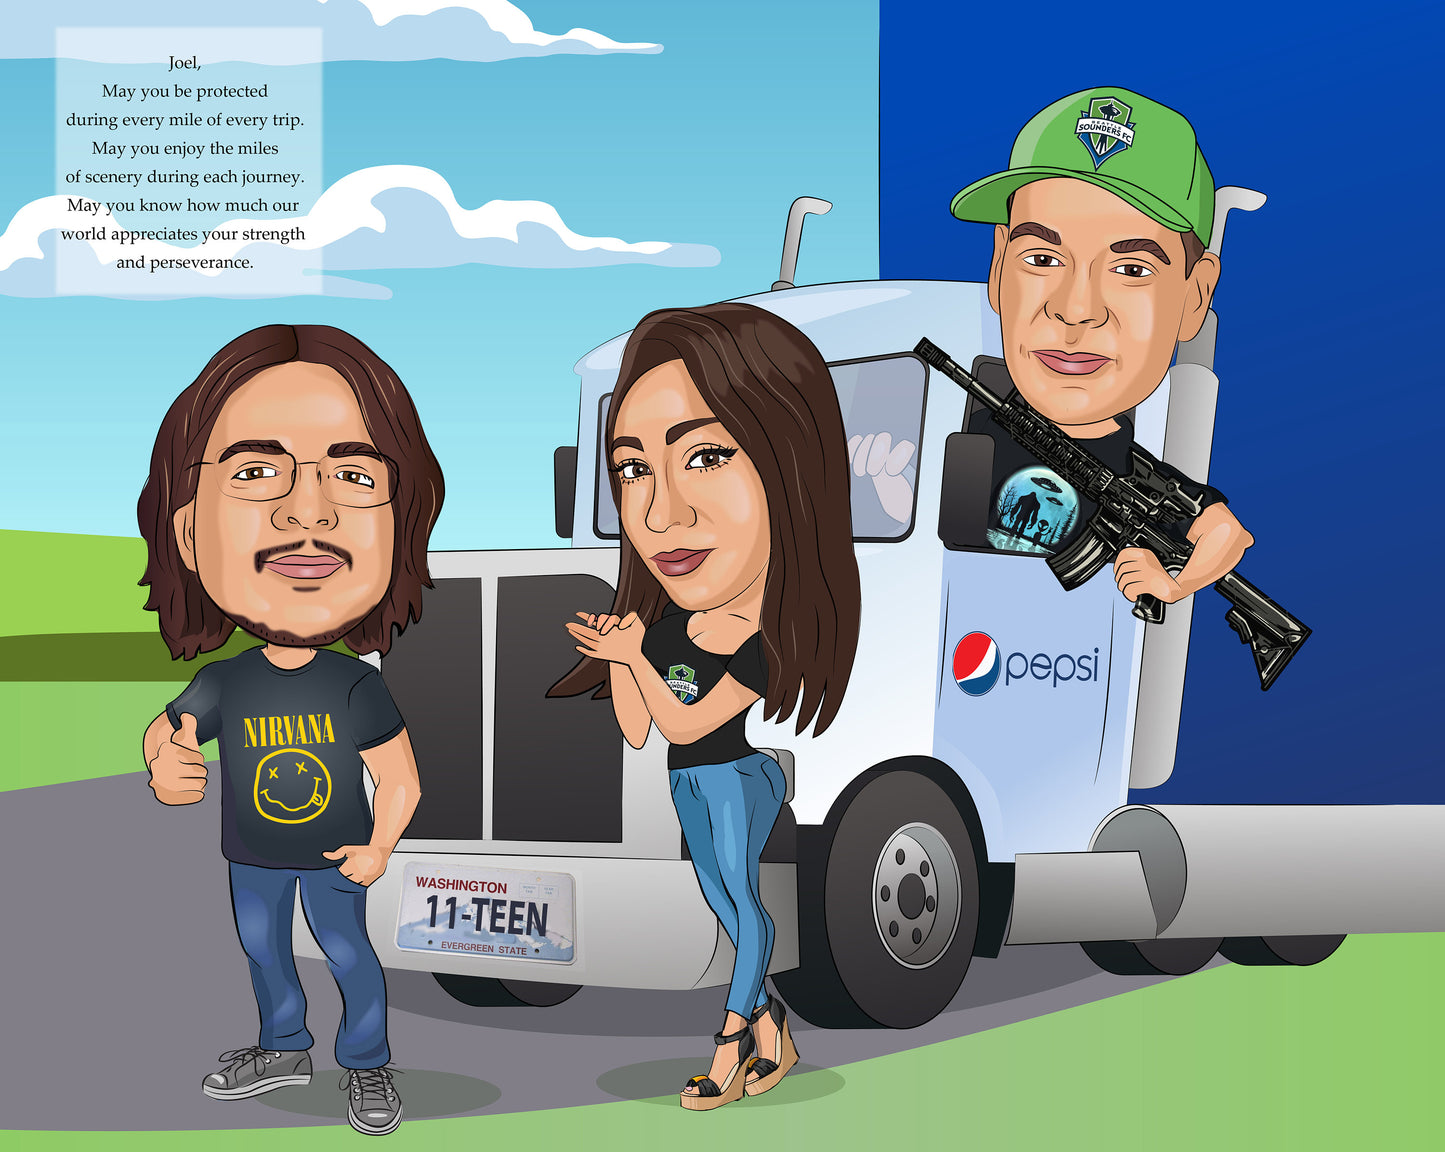 Truck Driver Gift - Custom Caricature Portrait From Your Photo/semi truck driver